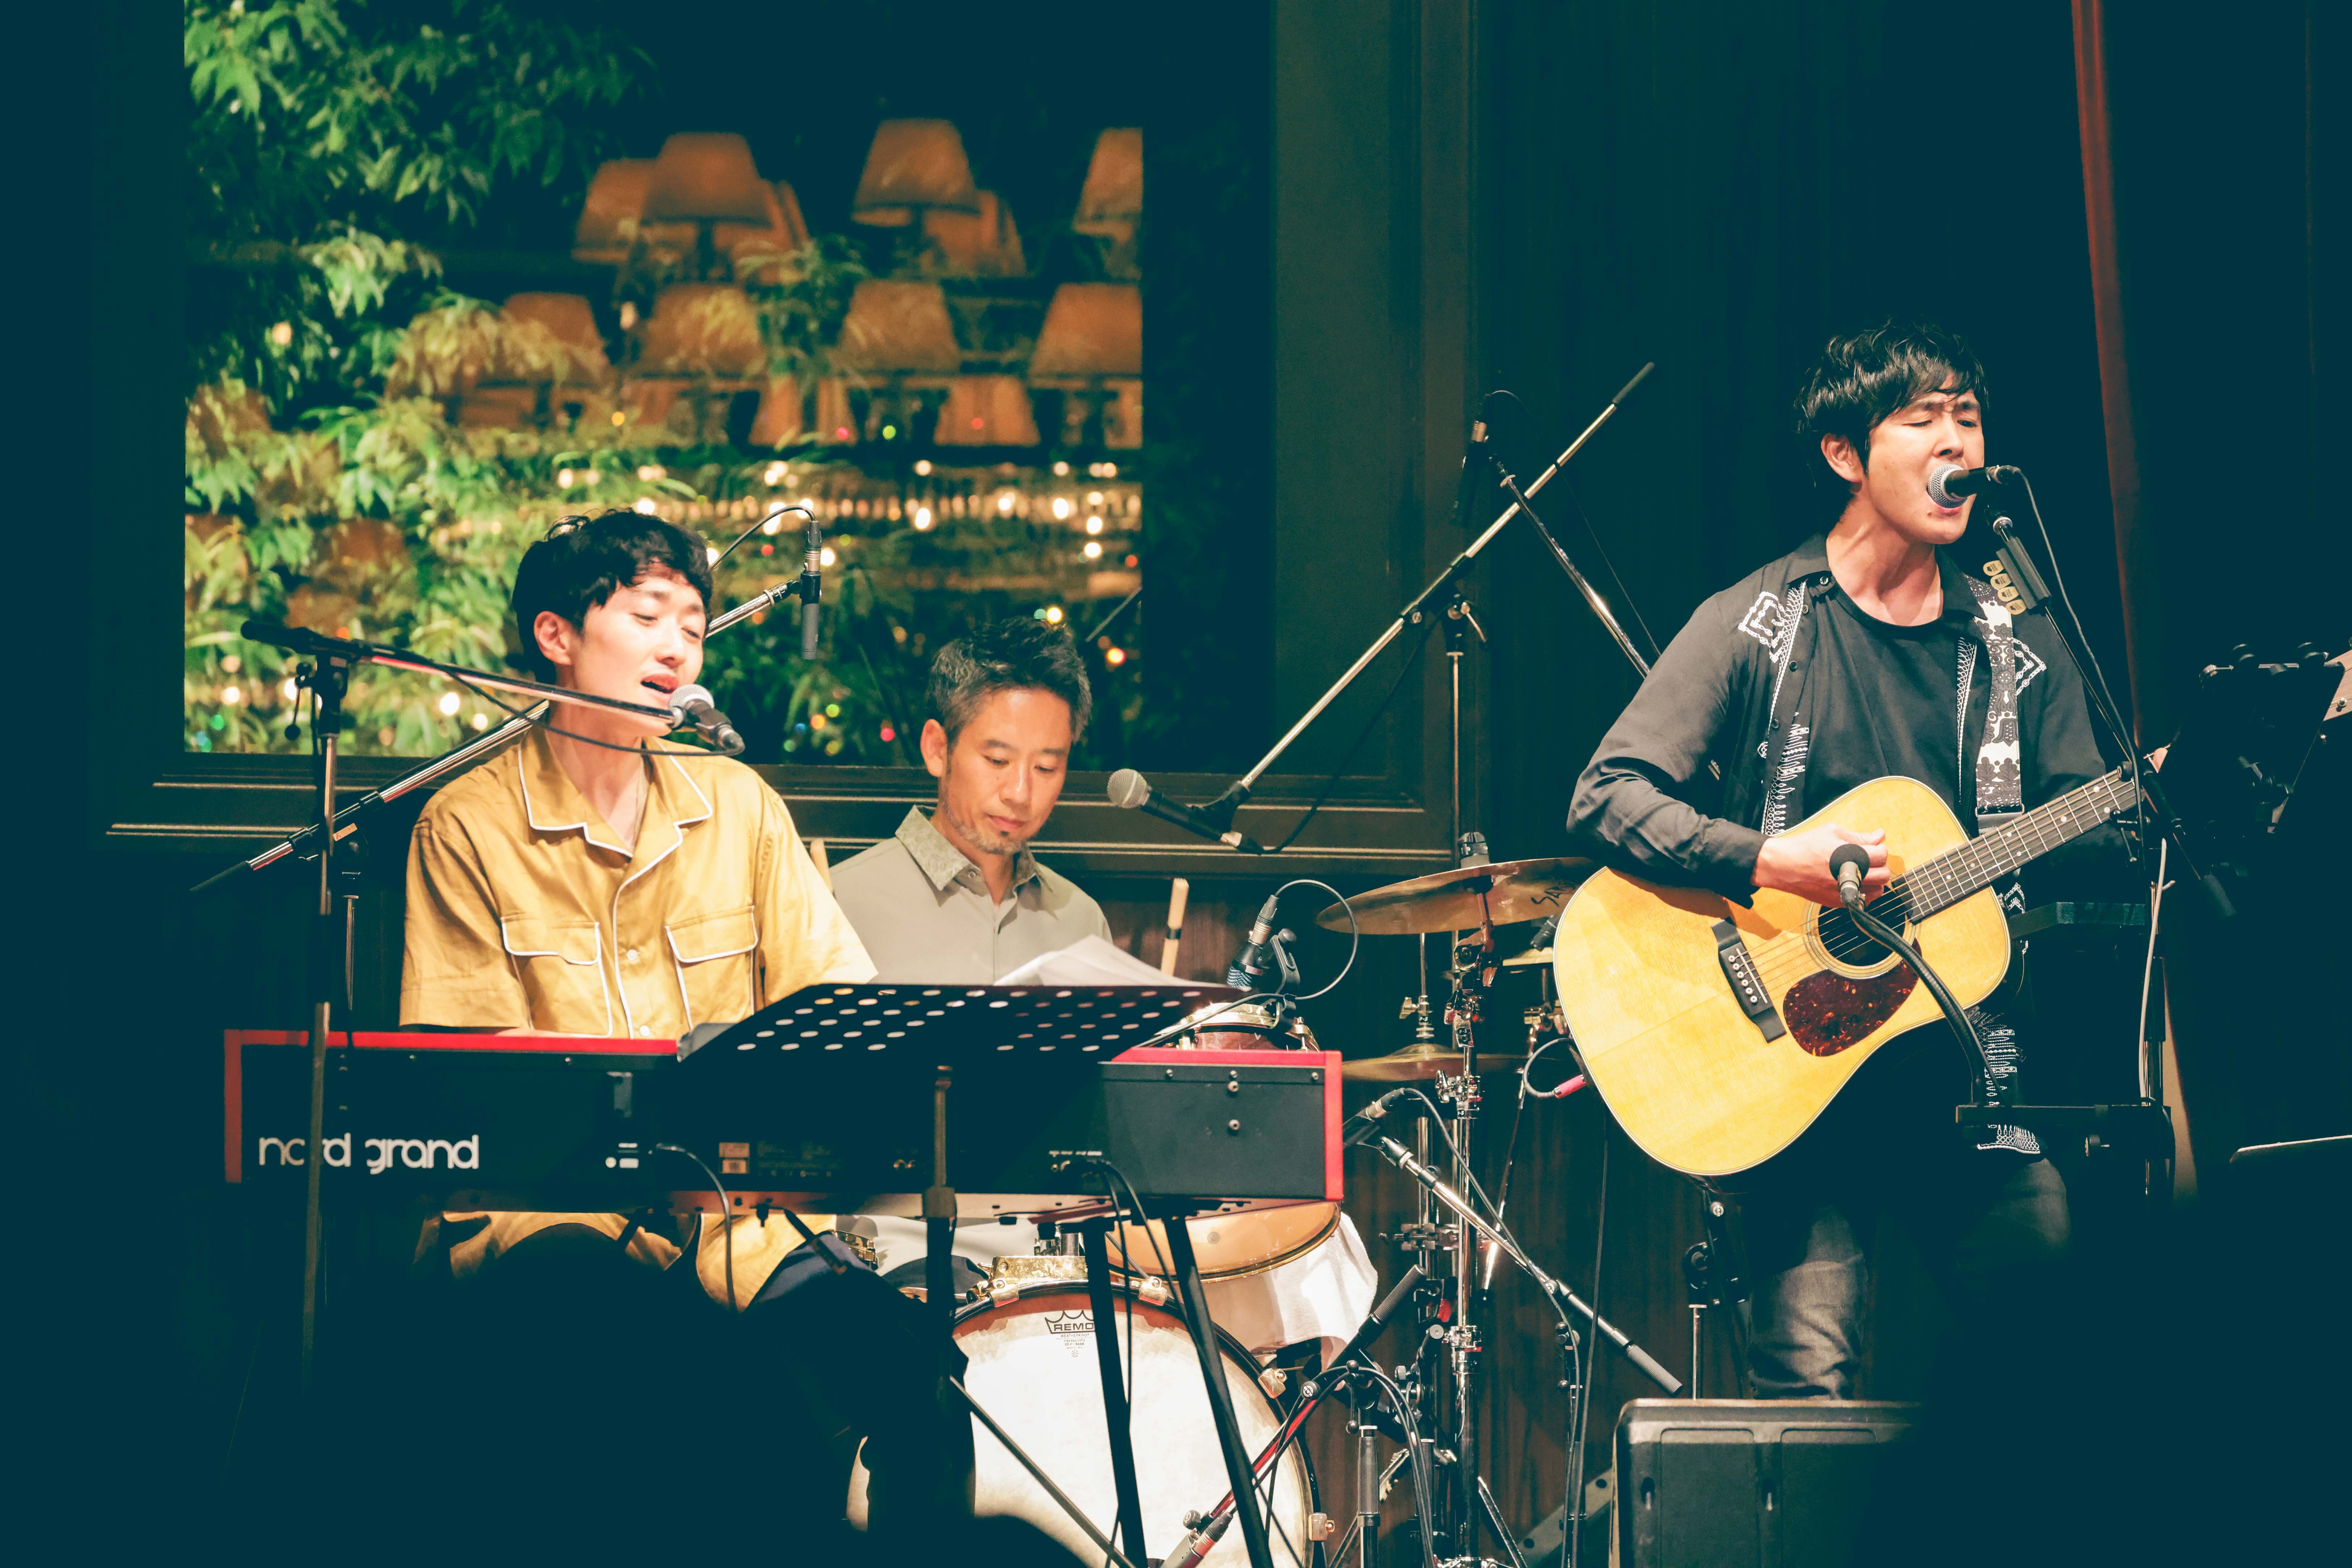 『FM802 ROCK &DISH vol.4 supported by ELECOM』